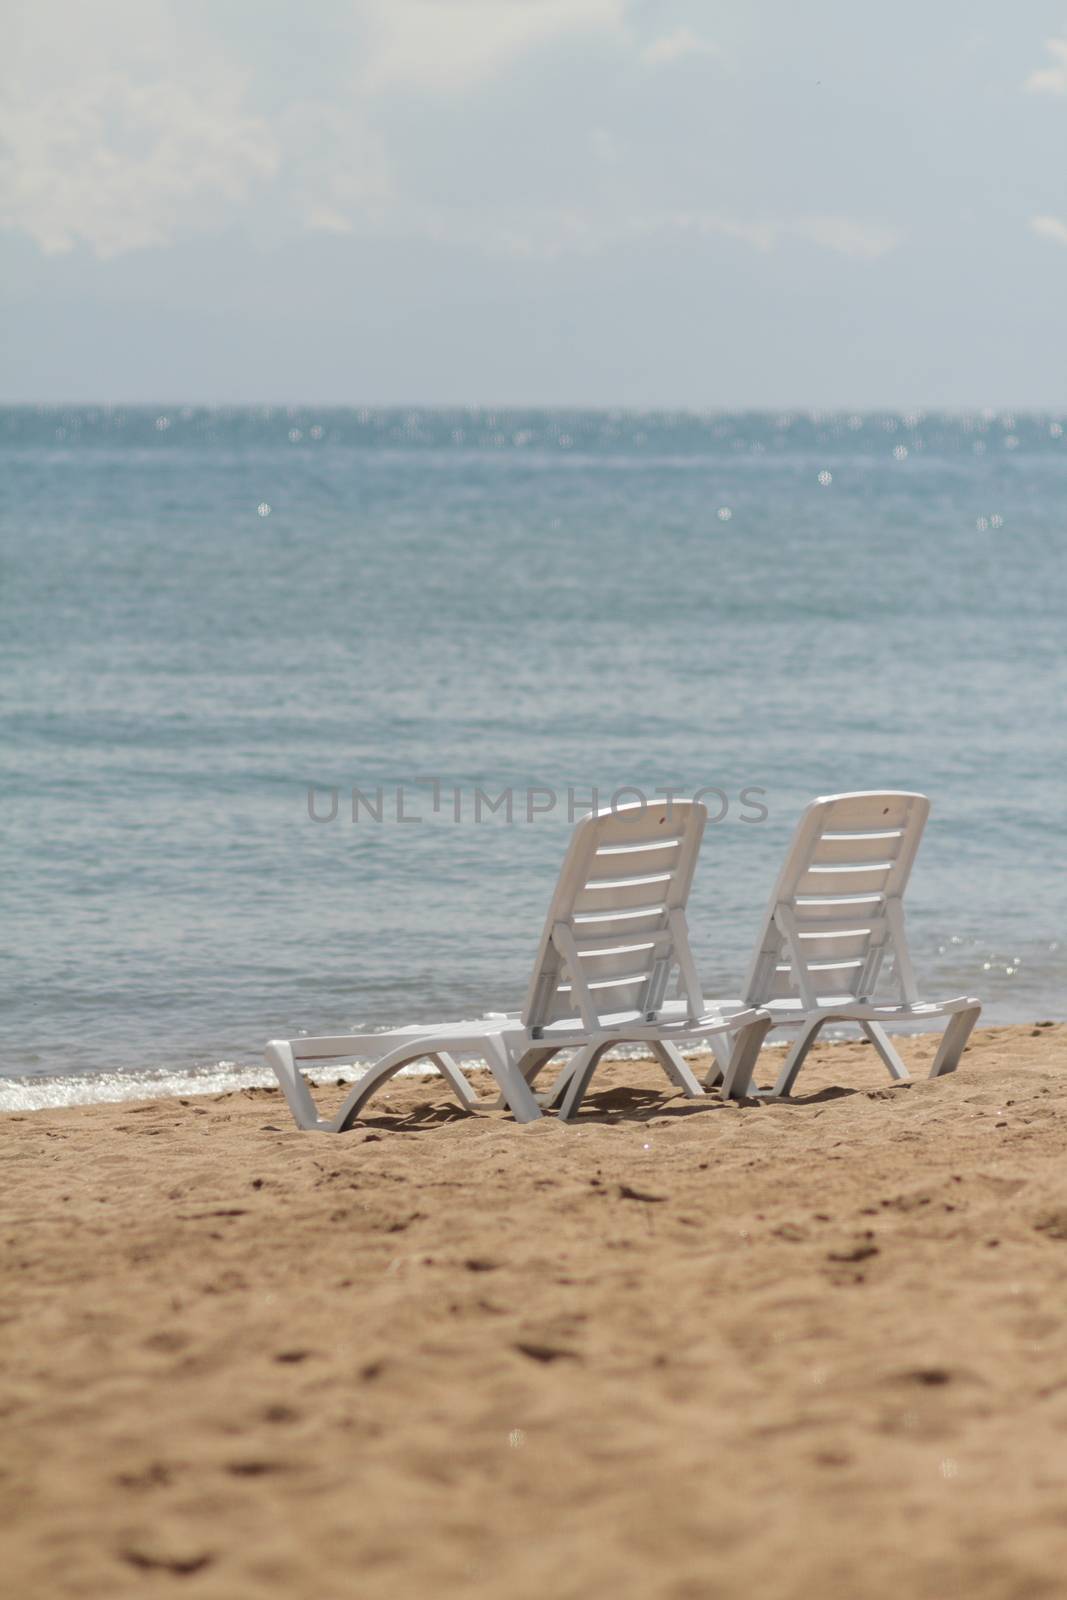 Deck chair in the sand on the shore. Relax, relaxation on the beach. Blue water in the ocean sea. Travel to the sea of the island. Holidays at sea. Air tourism. High quality photo